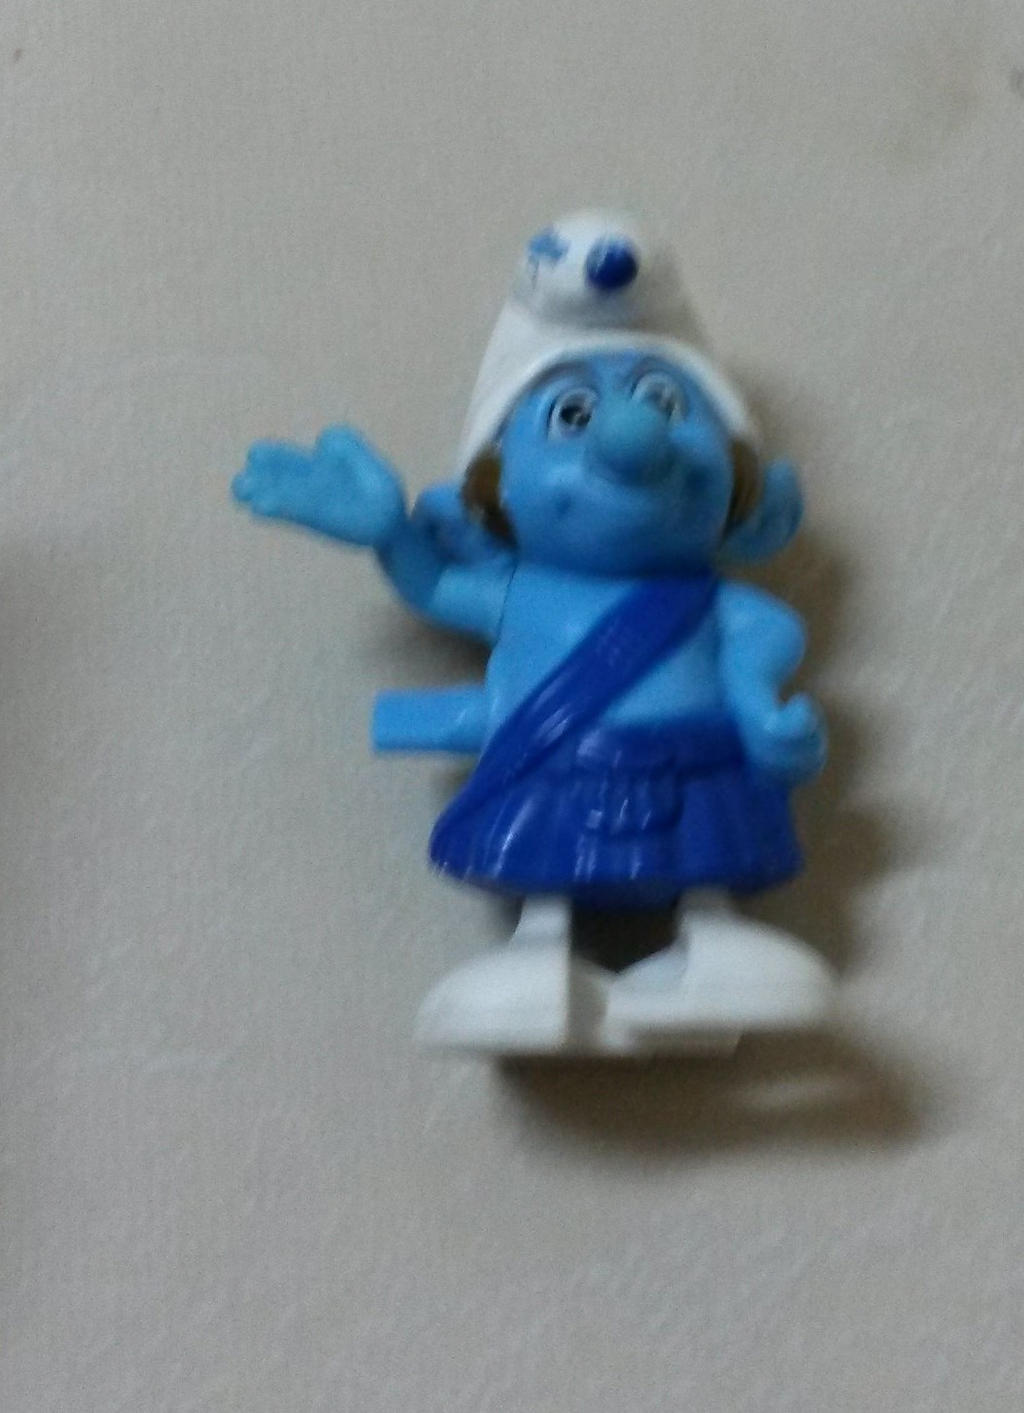 Gutsy Smurf's toy (McDonald's happy meal)